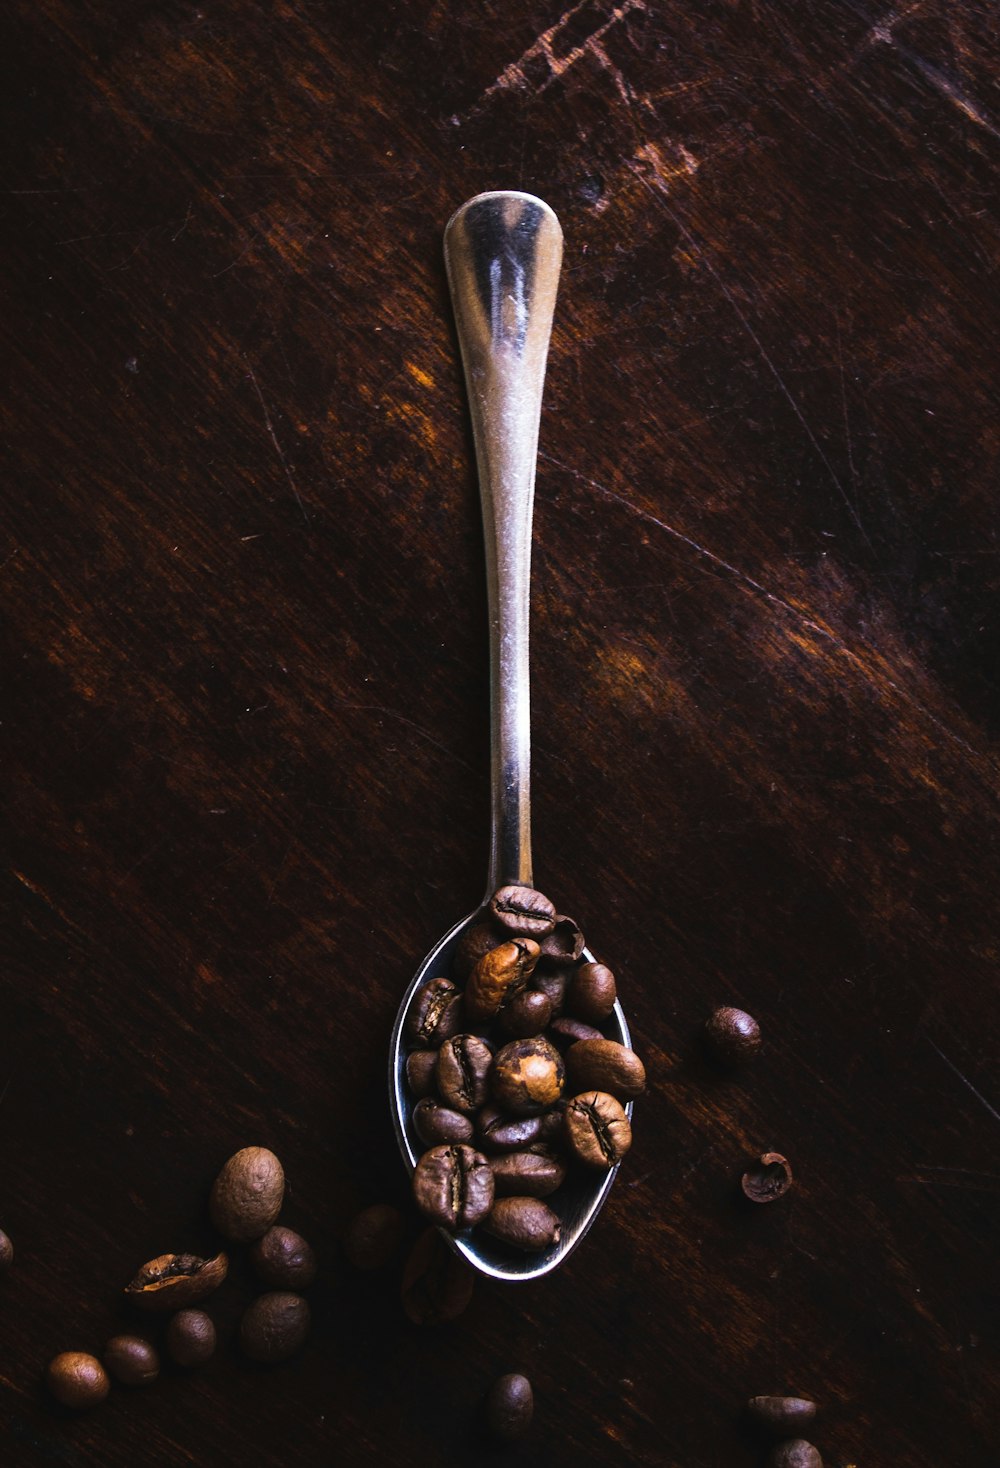 spoon of coffee beans